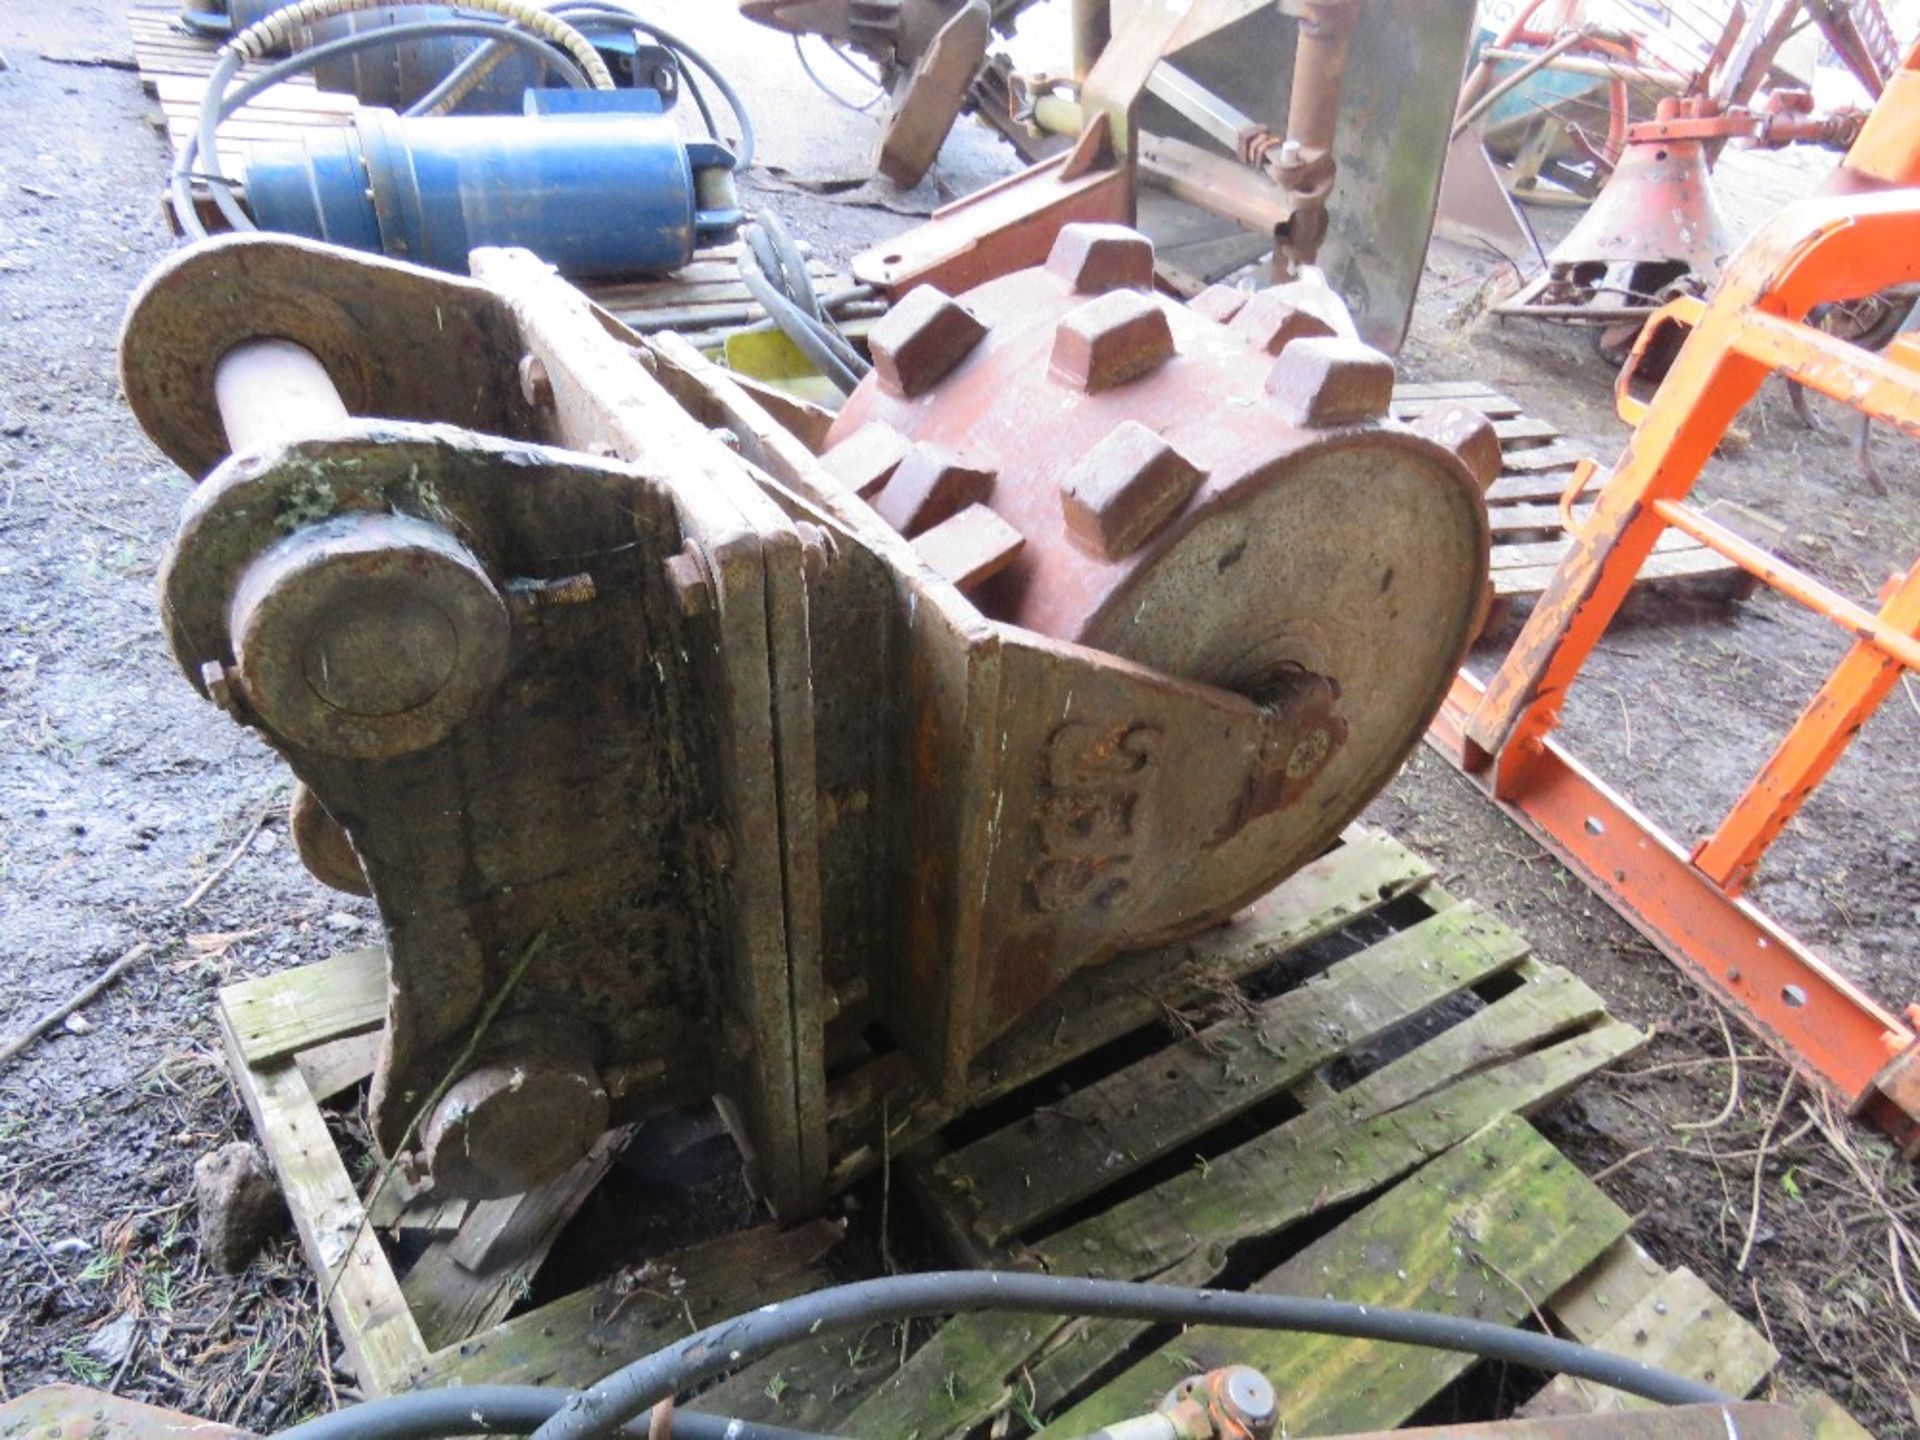 SEC EXCAVATOR MOUNTED SHEEPS FOOT COMPACTOR ROLLER ON 80MM PINS. - Image 3 of 4